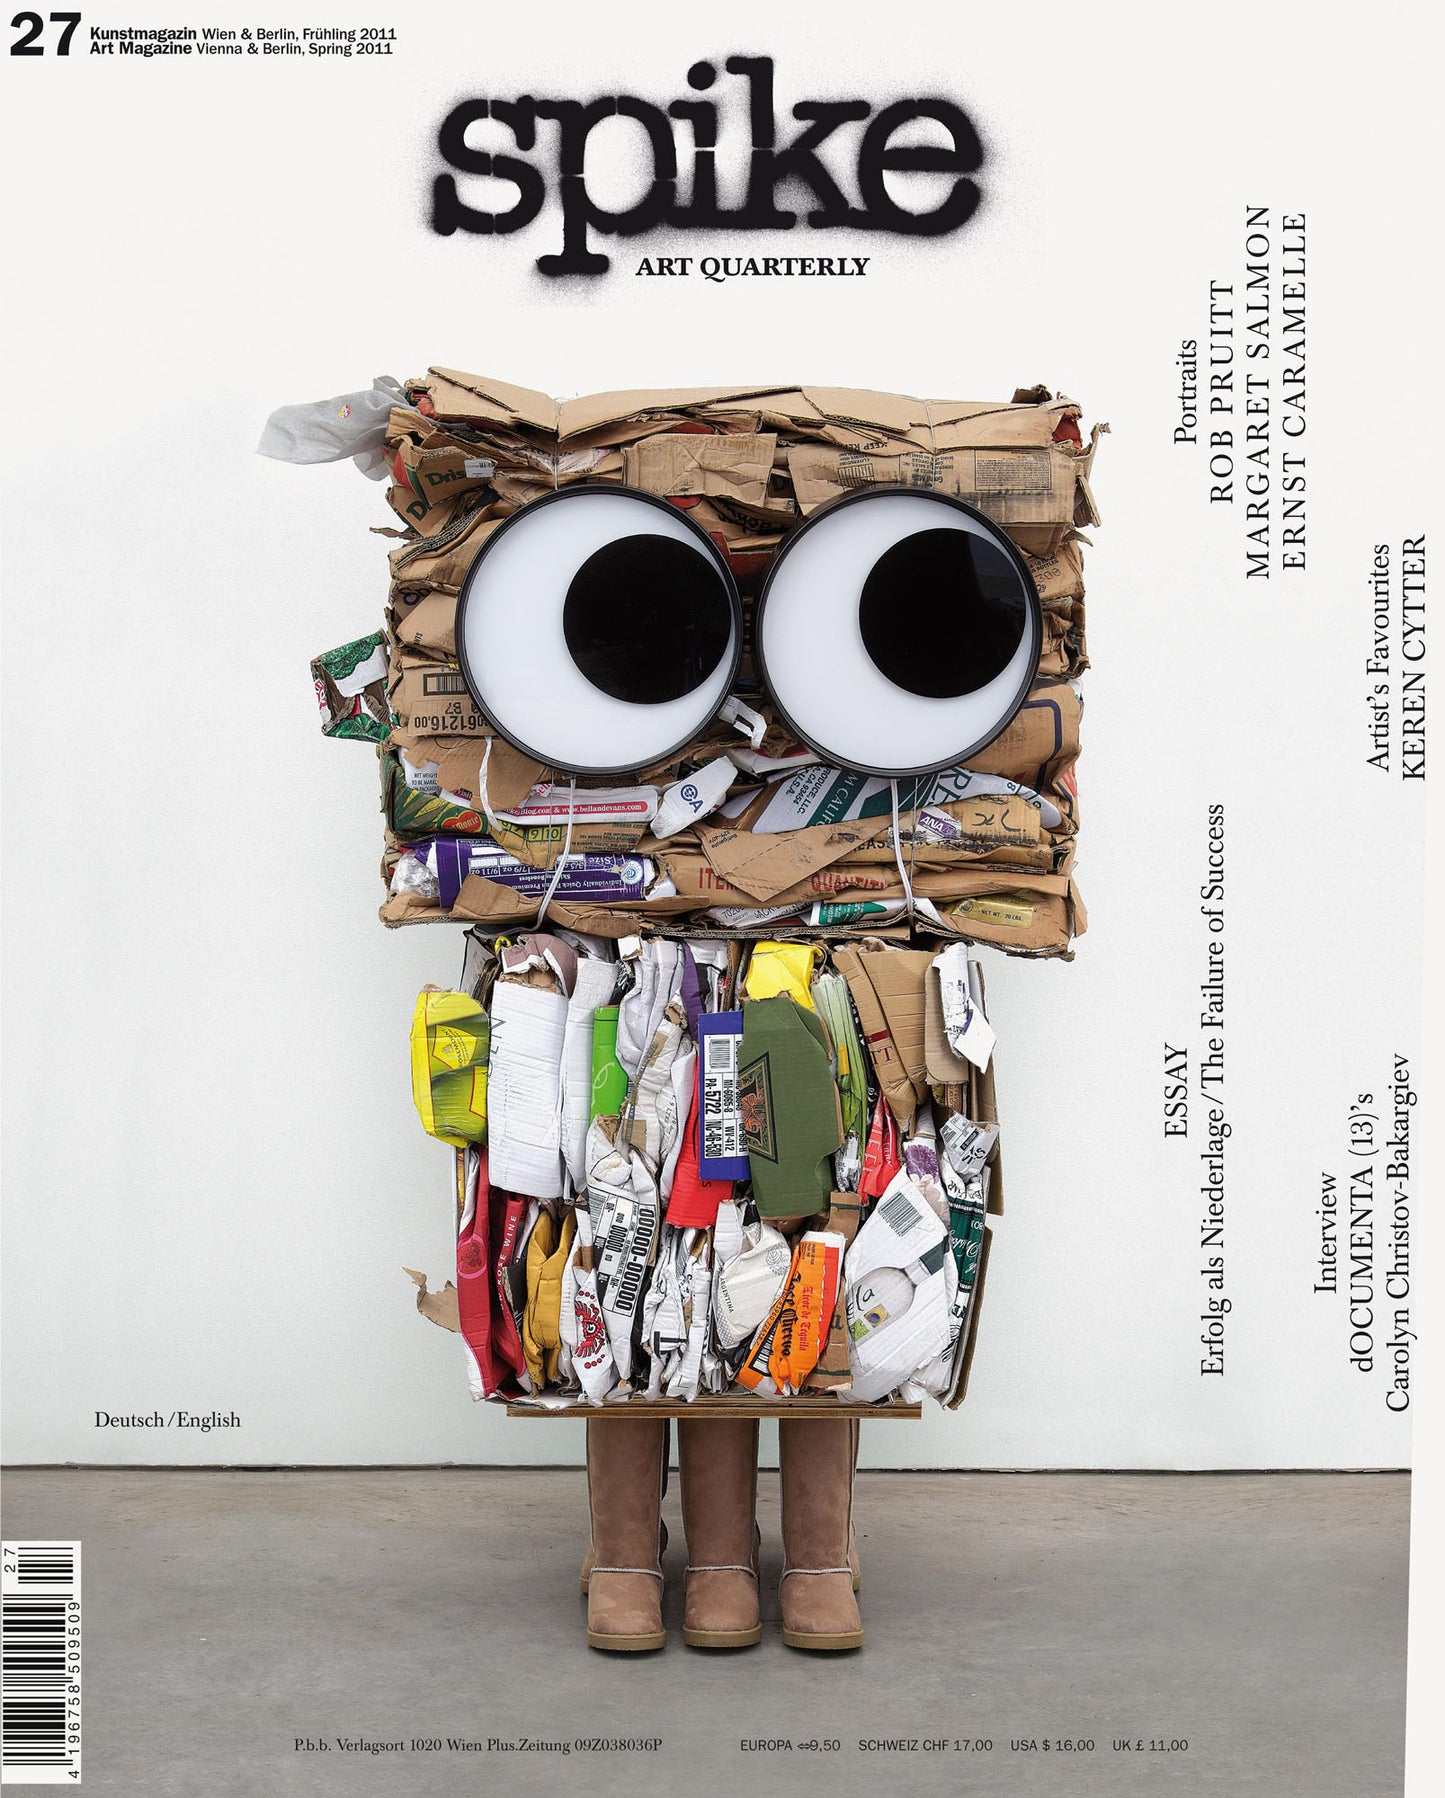 ISSUE 27 (SPRING 2011)